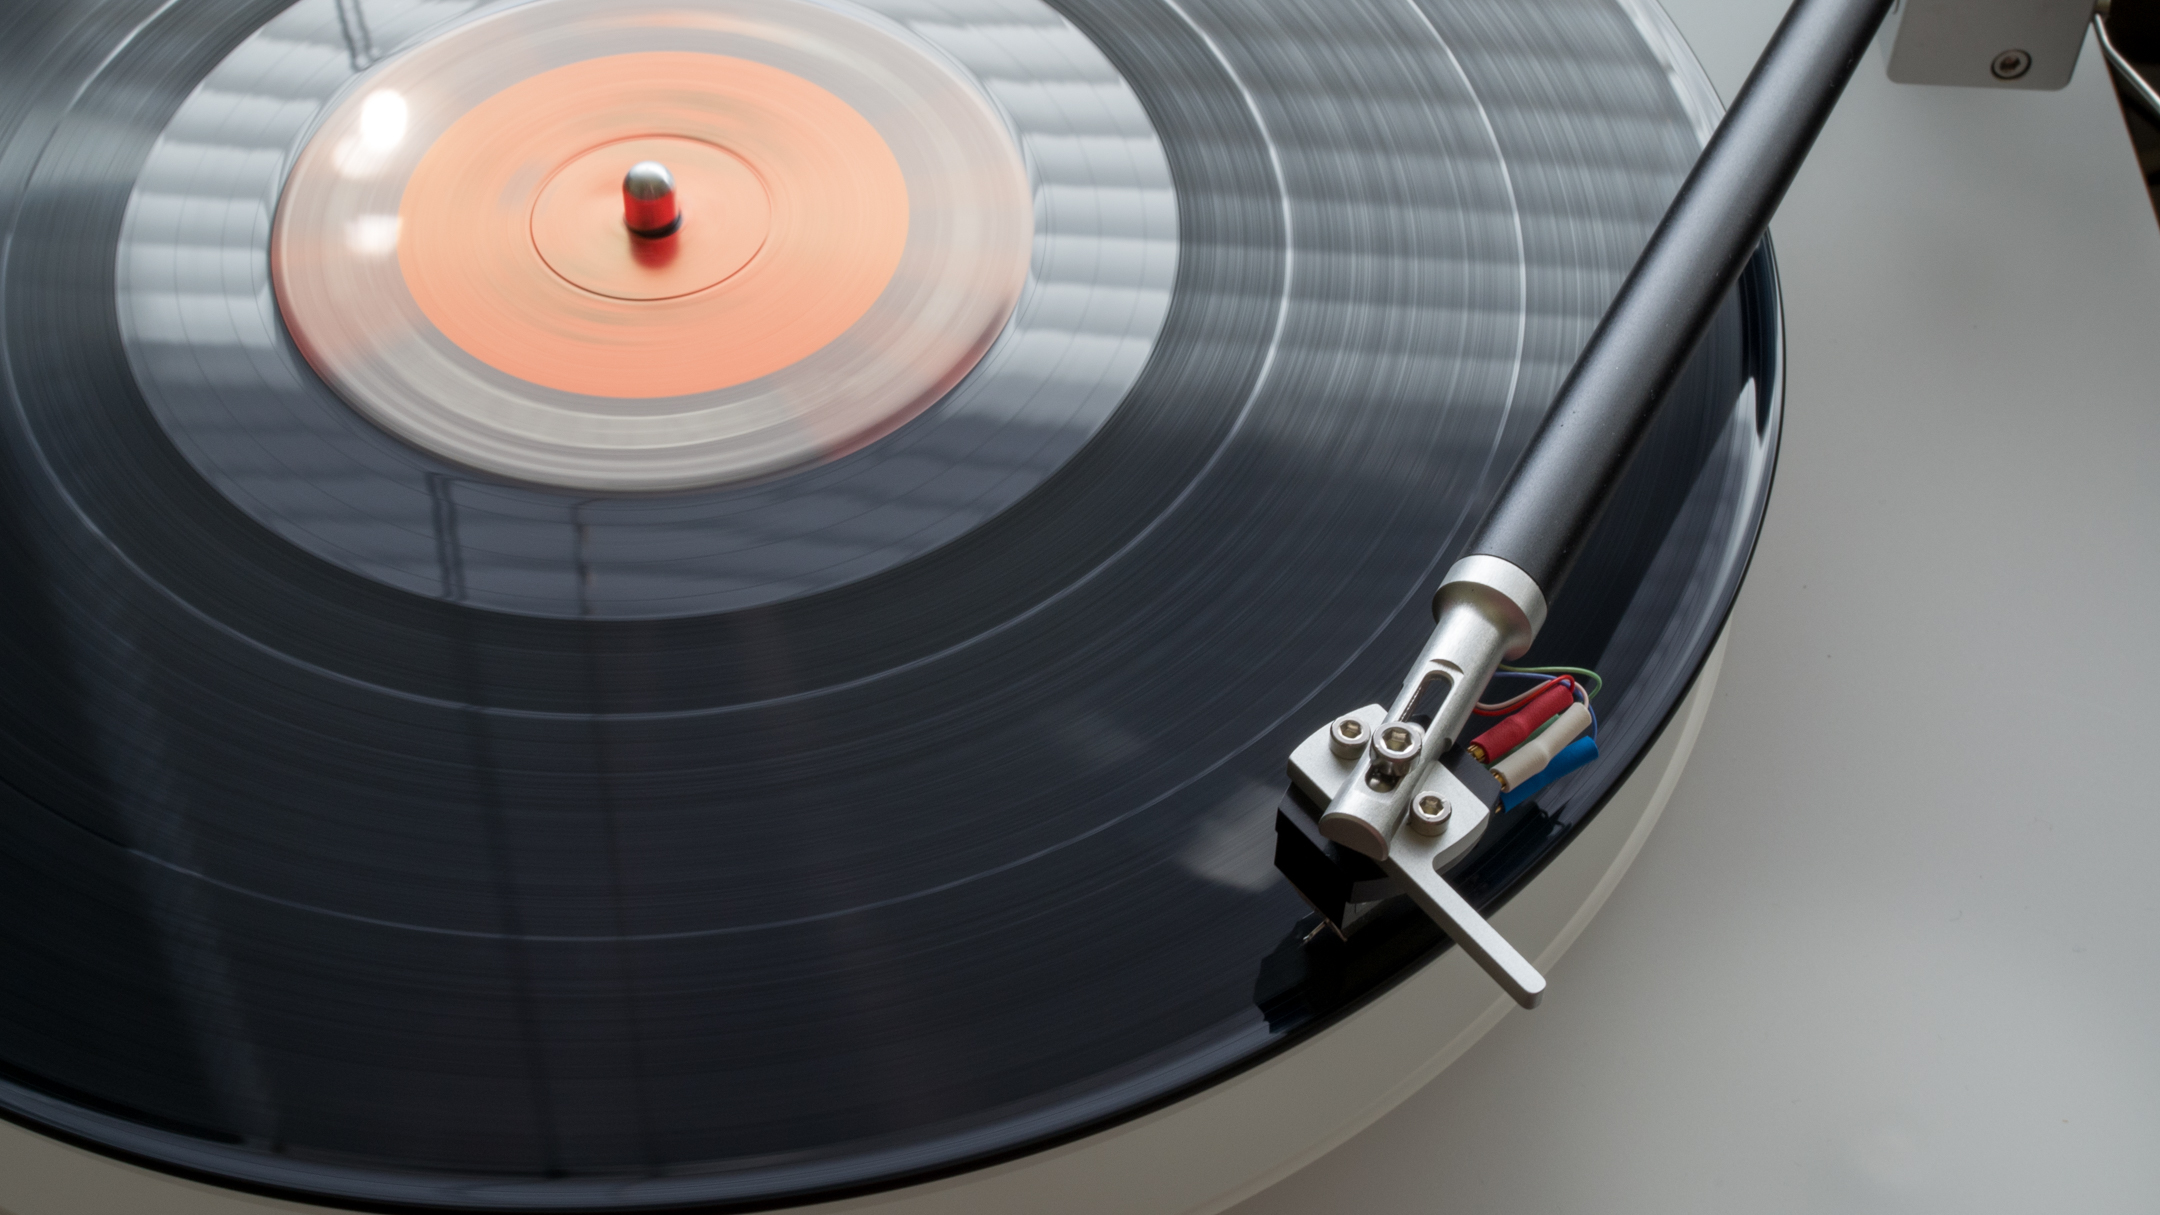 How does vinyl work and is it really better than streaming from Spotify?